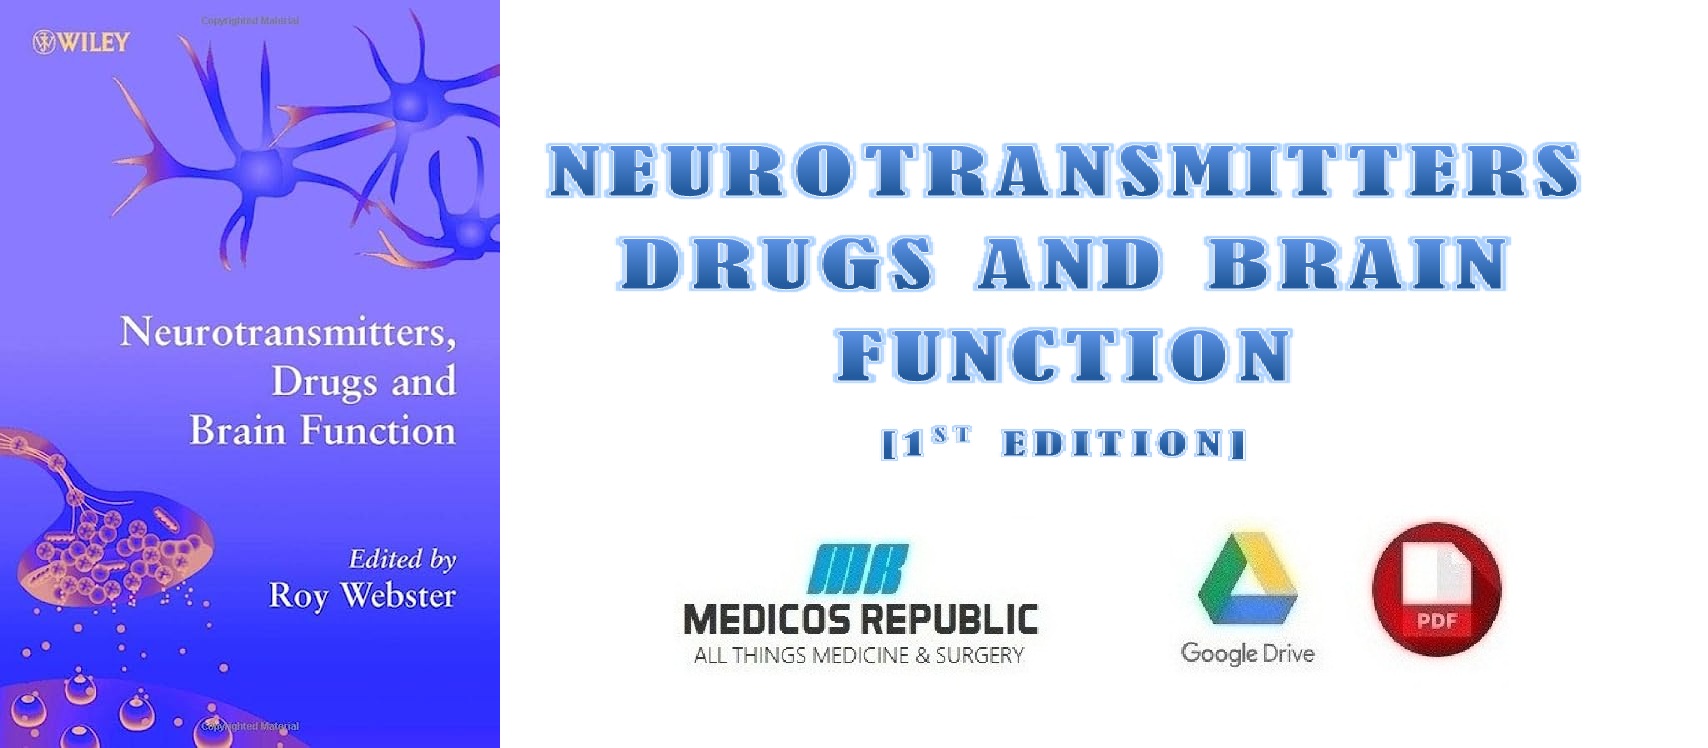 Neurotransmitters, Drugs and Brain Function 1st Edition PDF